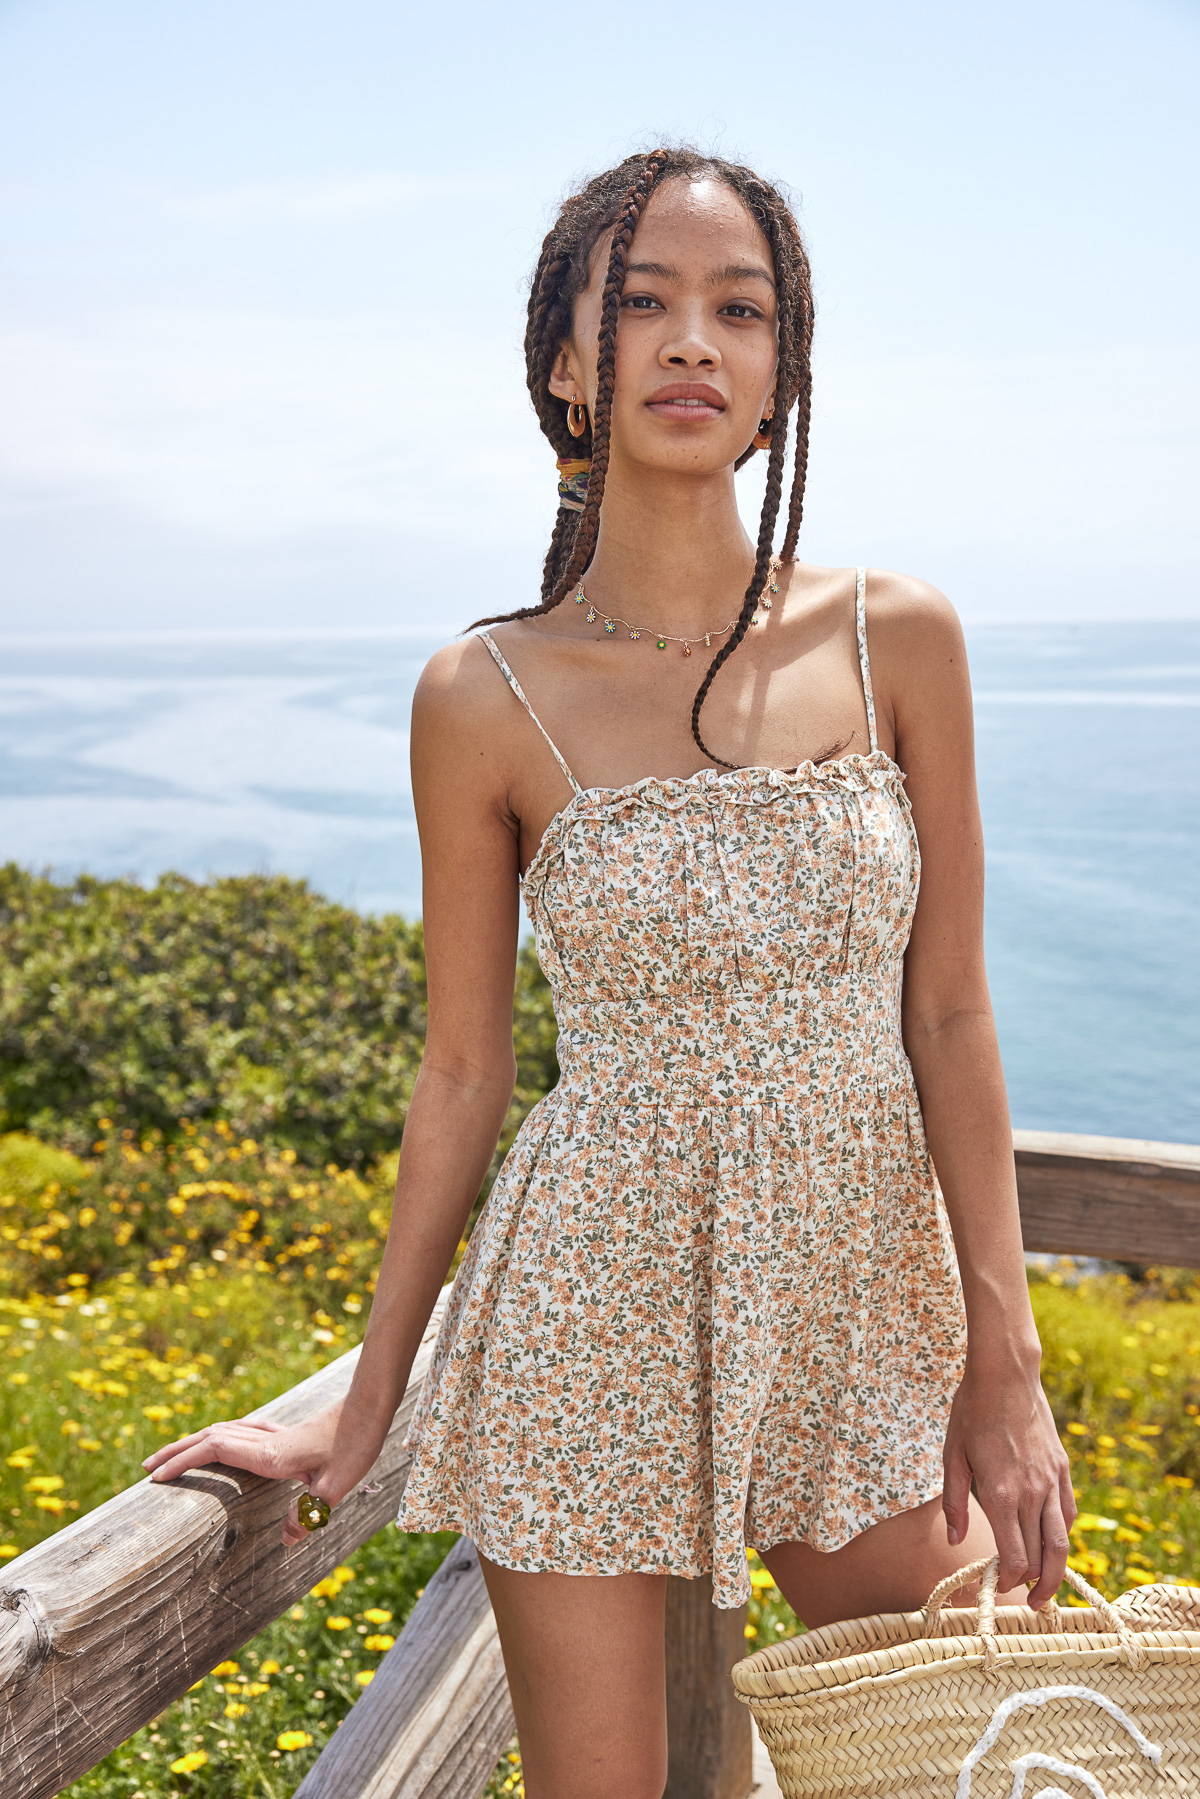 Trixxi sun-kissed summer, girl at ocean side beach pier, in yellow floral ditsy romper.